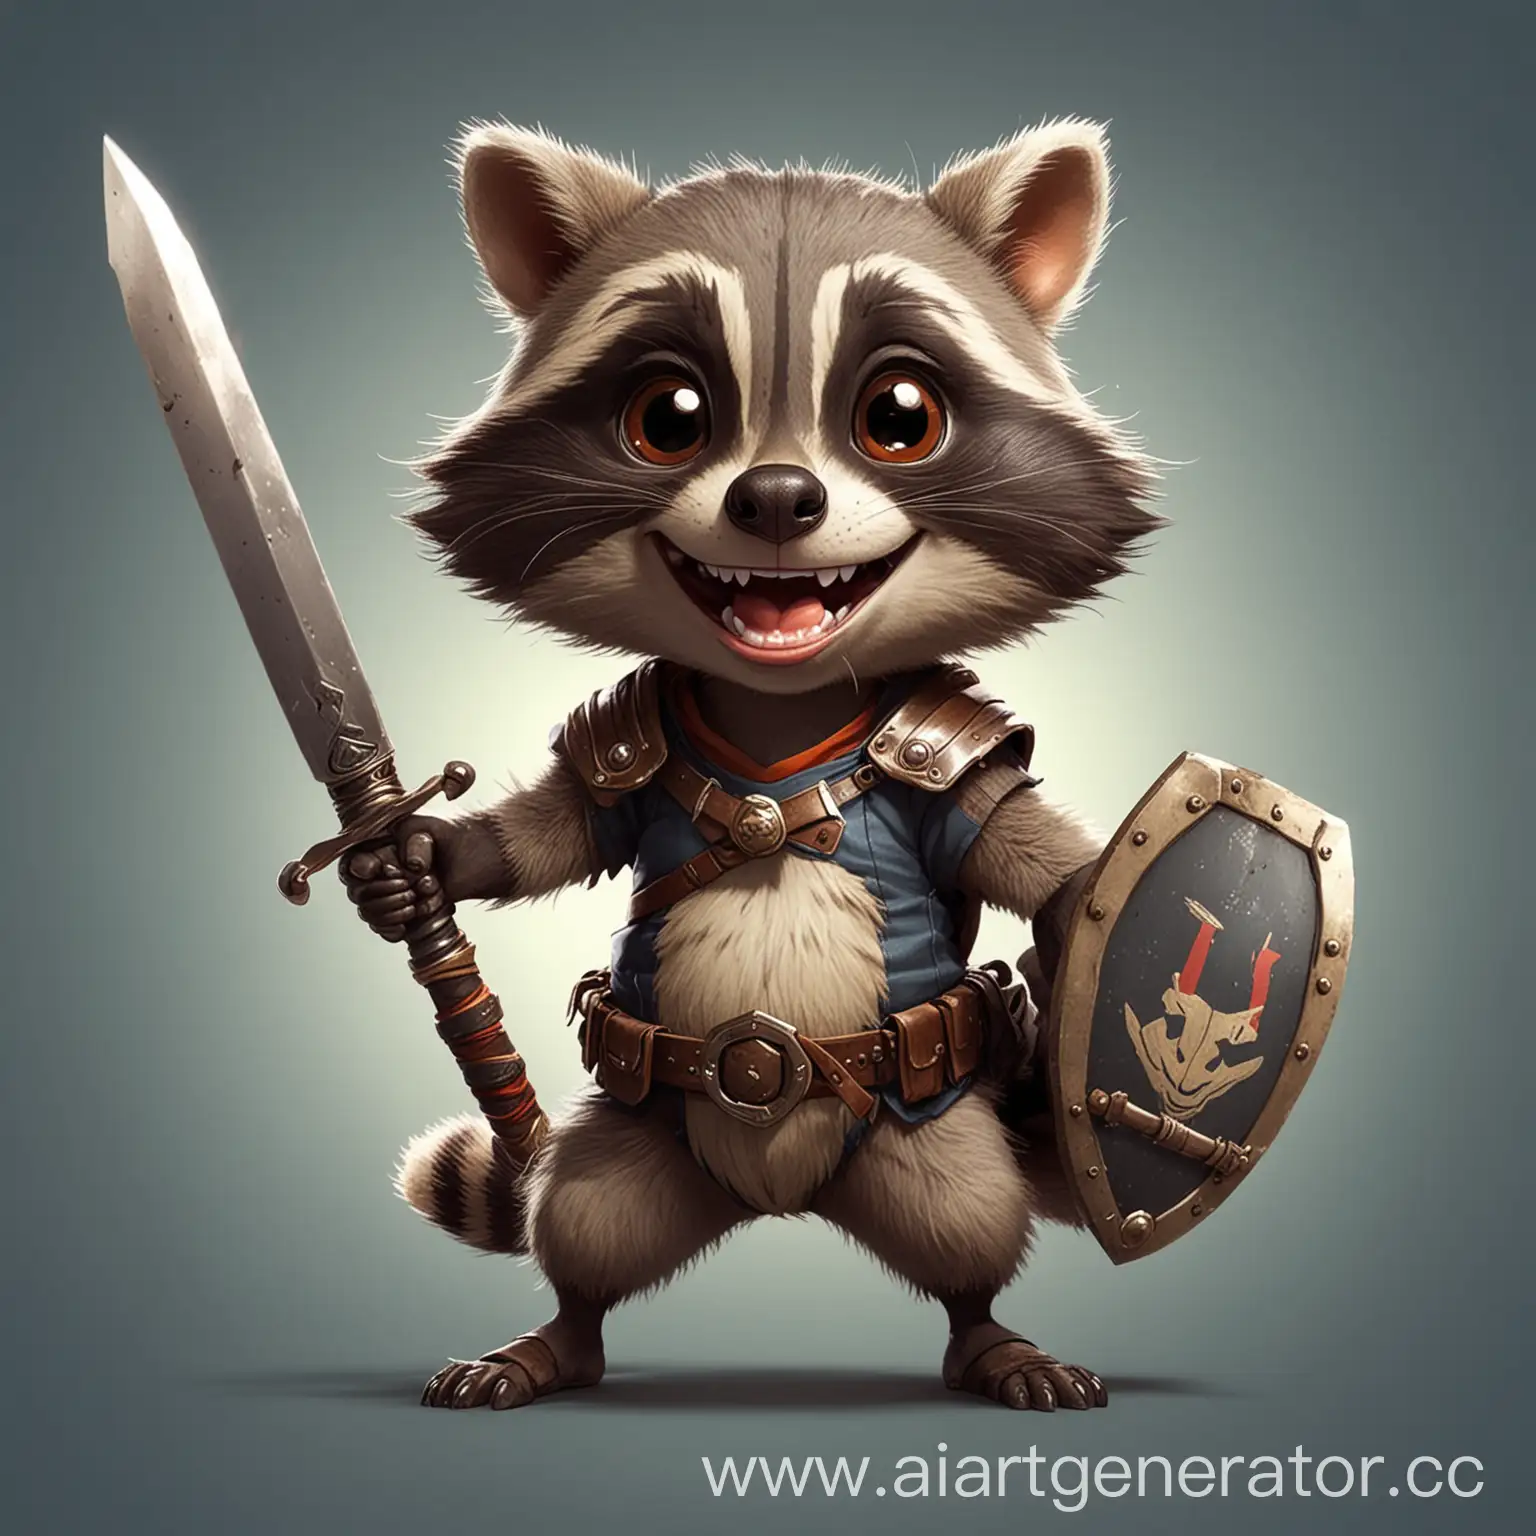 Anime-Raccoon-Warrior-with-Sword-and-Shield-Smiling